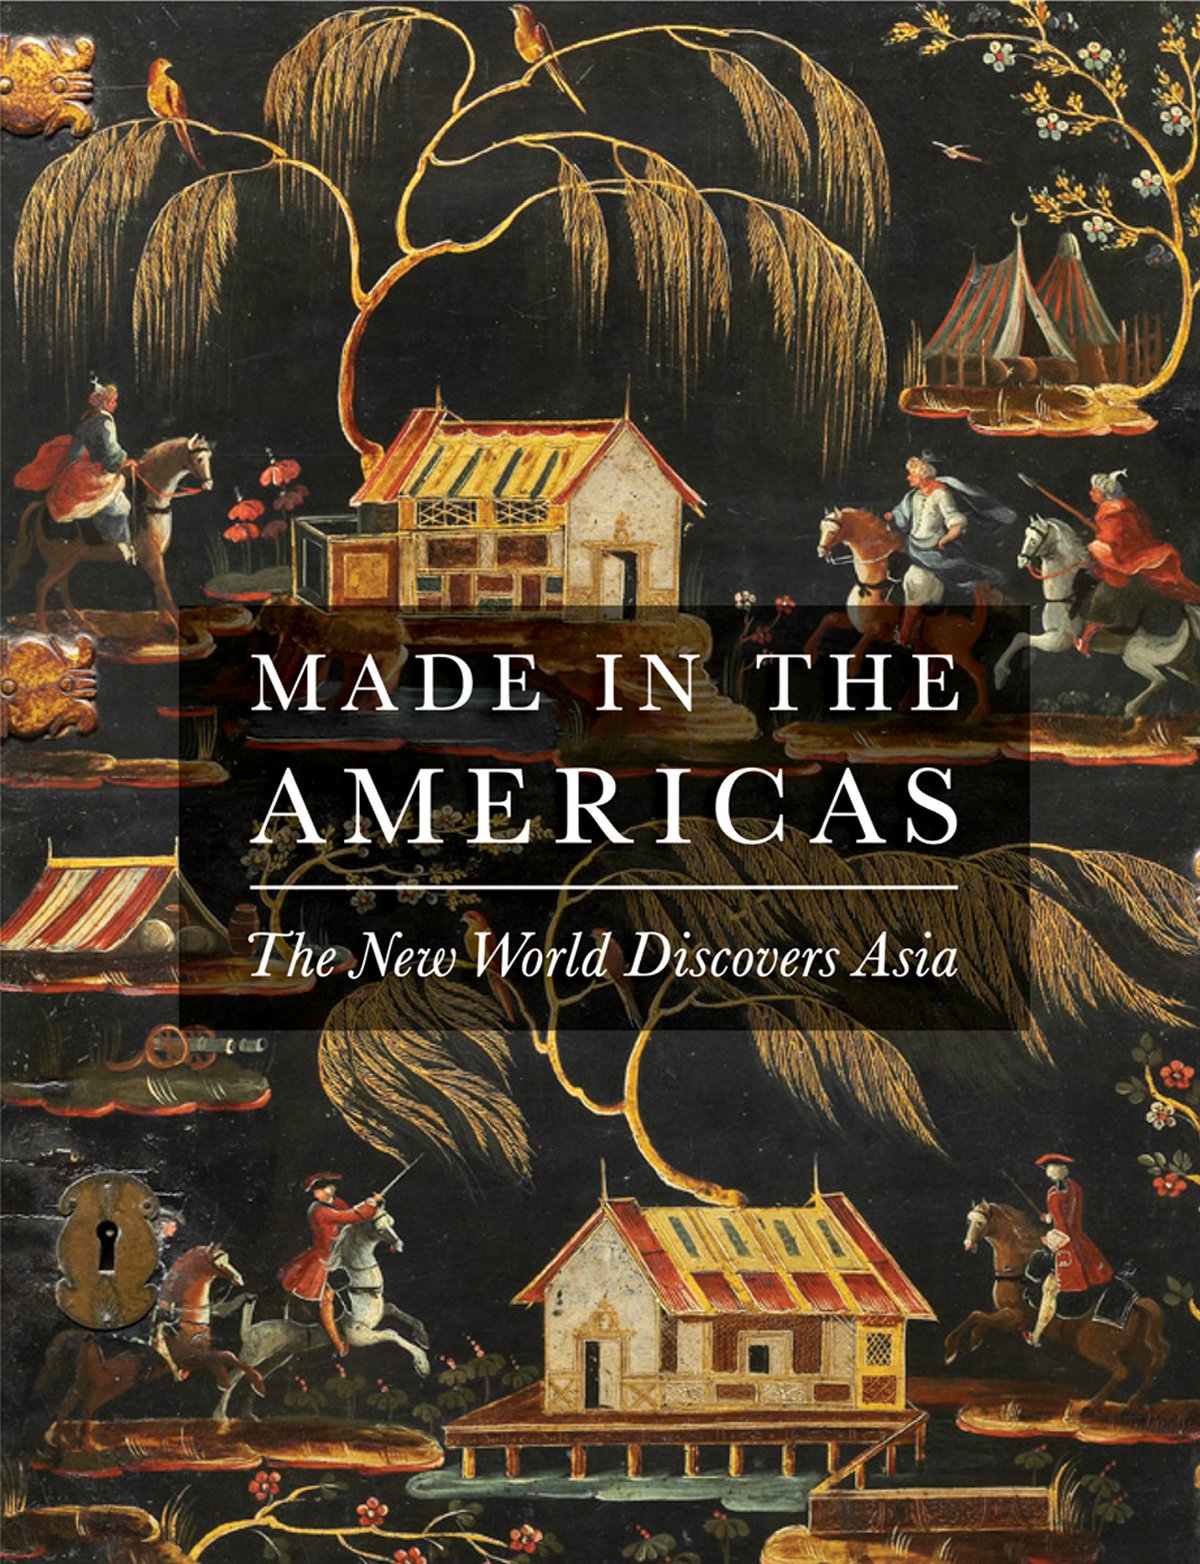 Cover for the book Made in the Americas: The New World Discovers Asia by Dennis Carr.